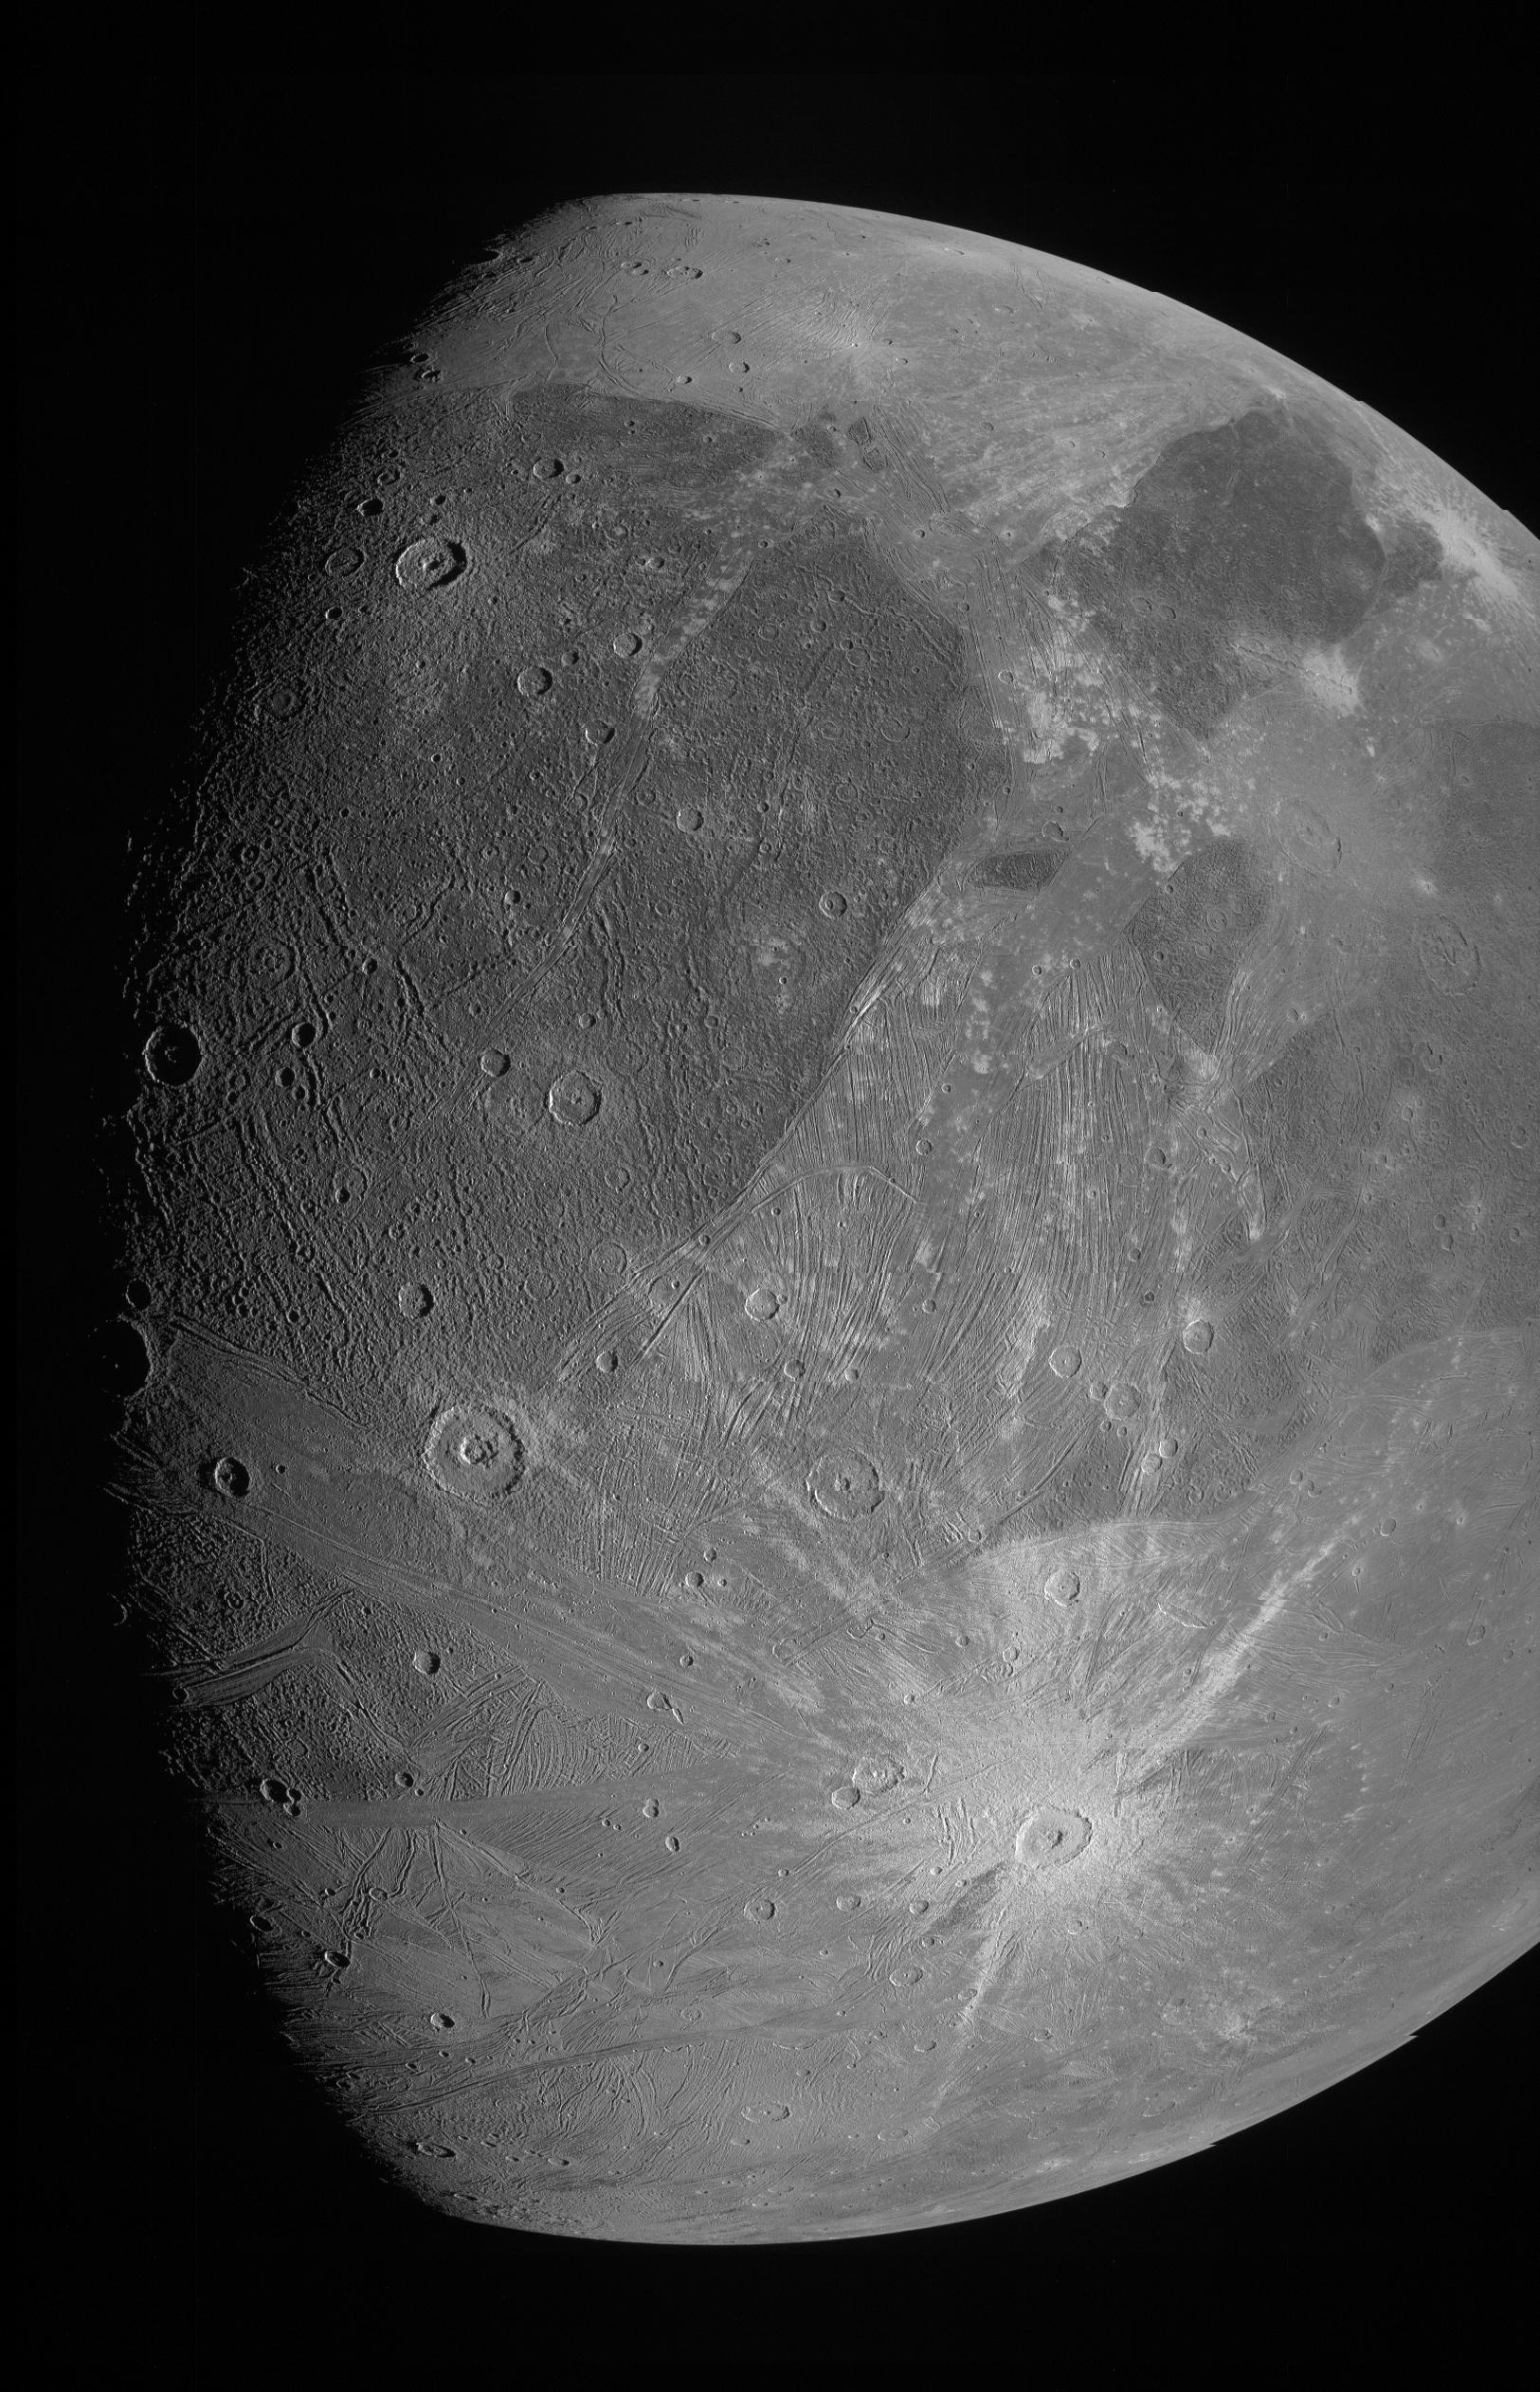 A grayish moon with bright spots and a "belly button" crater at the bottom.